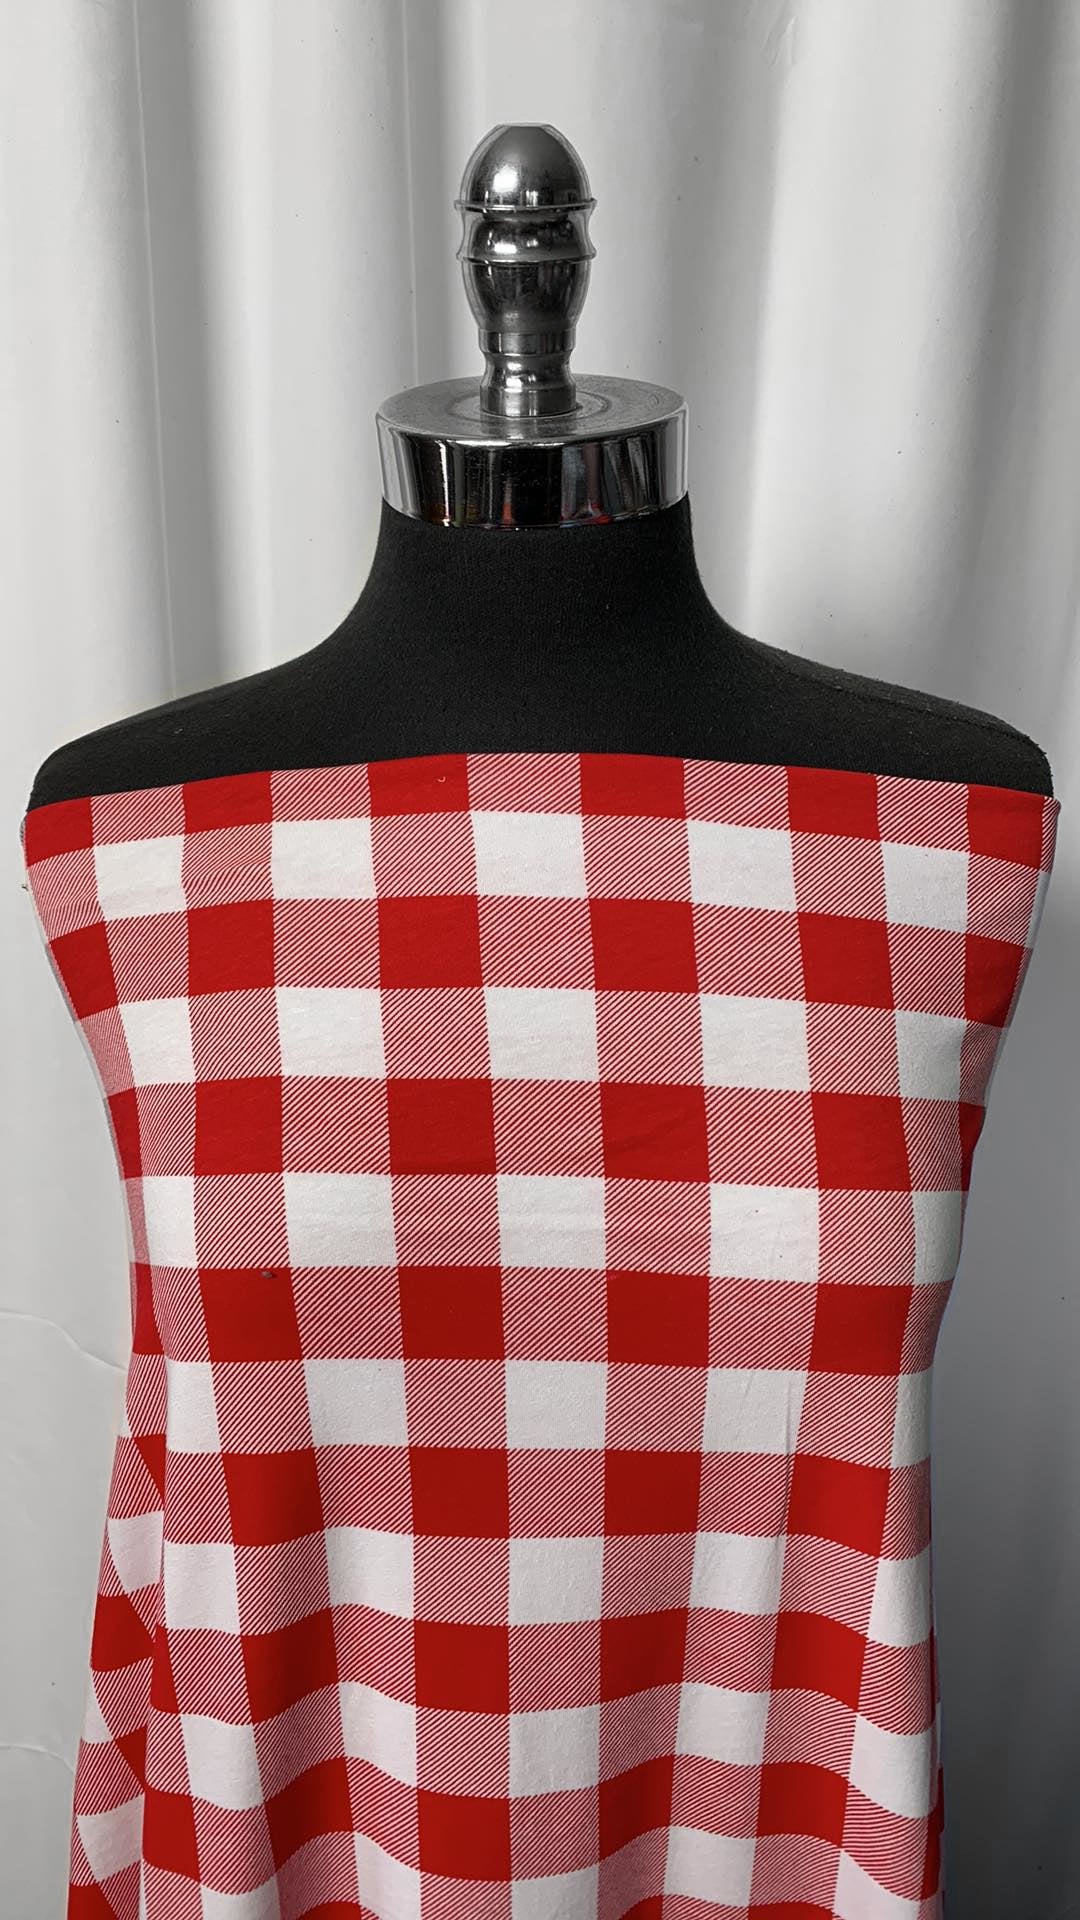 Red Plaid - 95/5 Light Weight Cotton/Spandex - By the yard